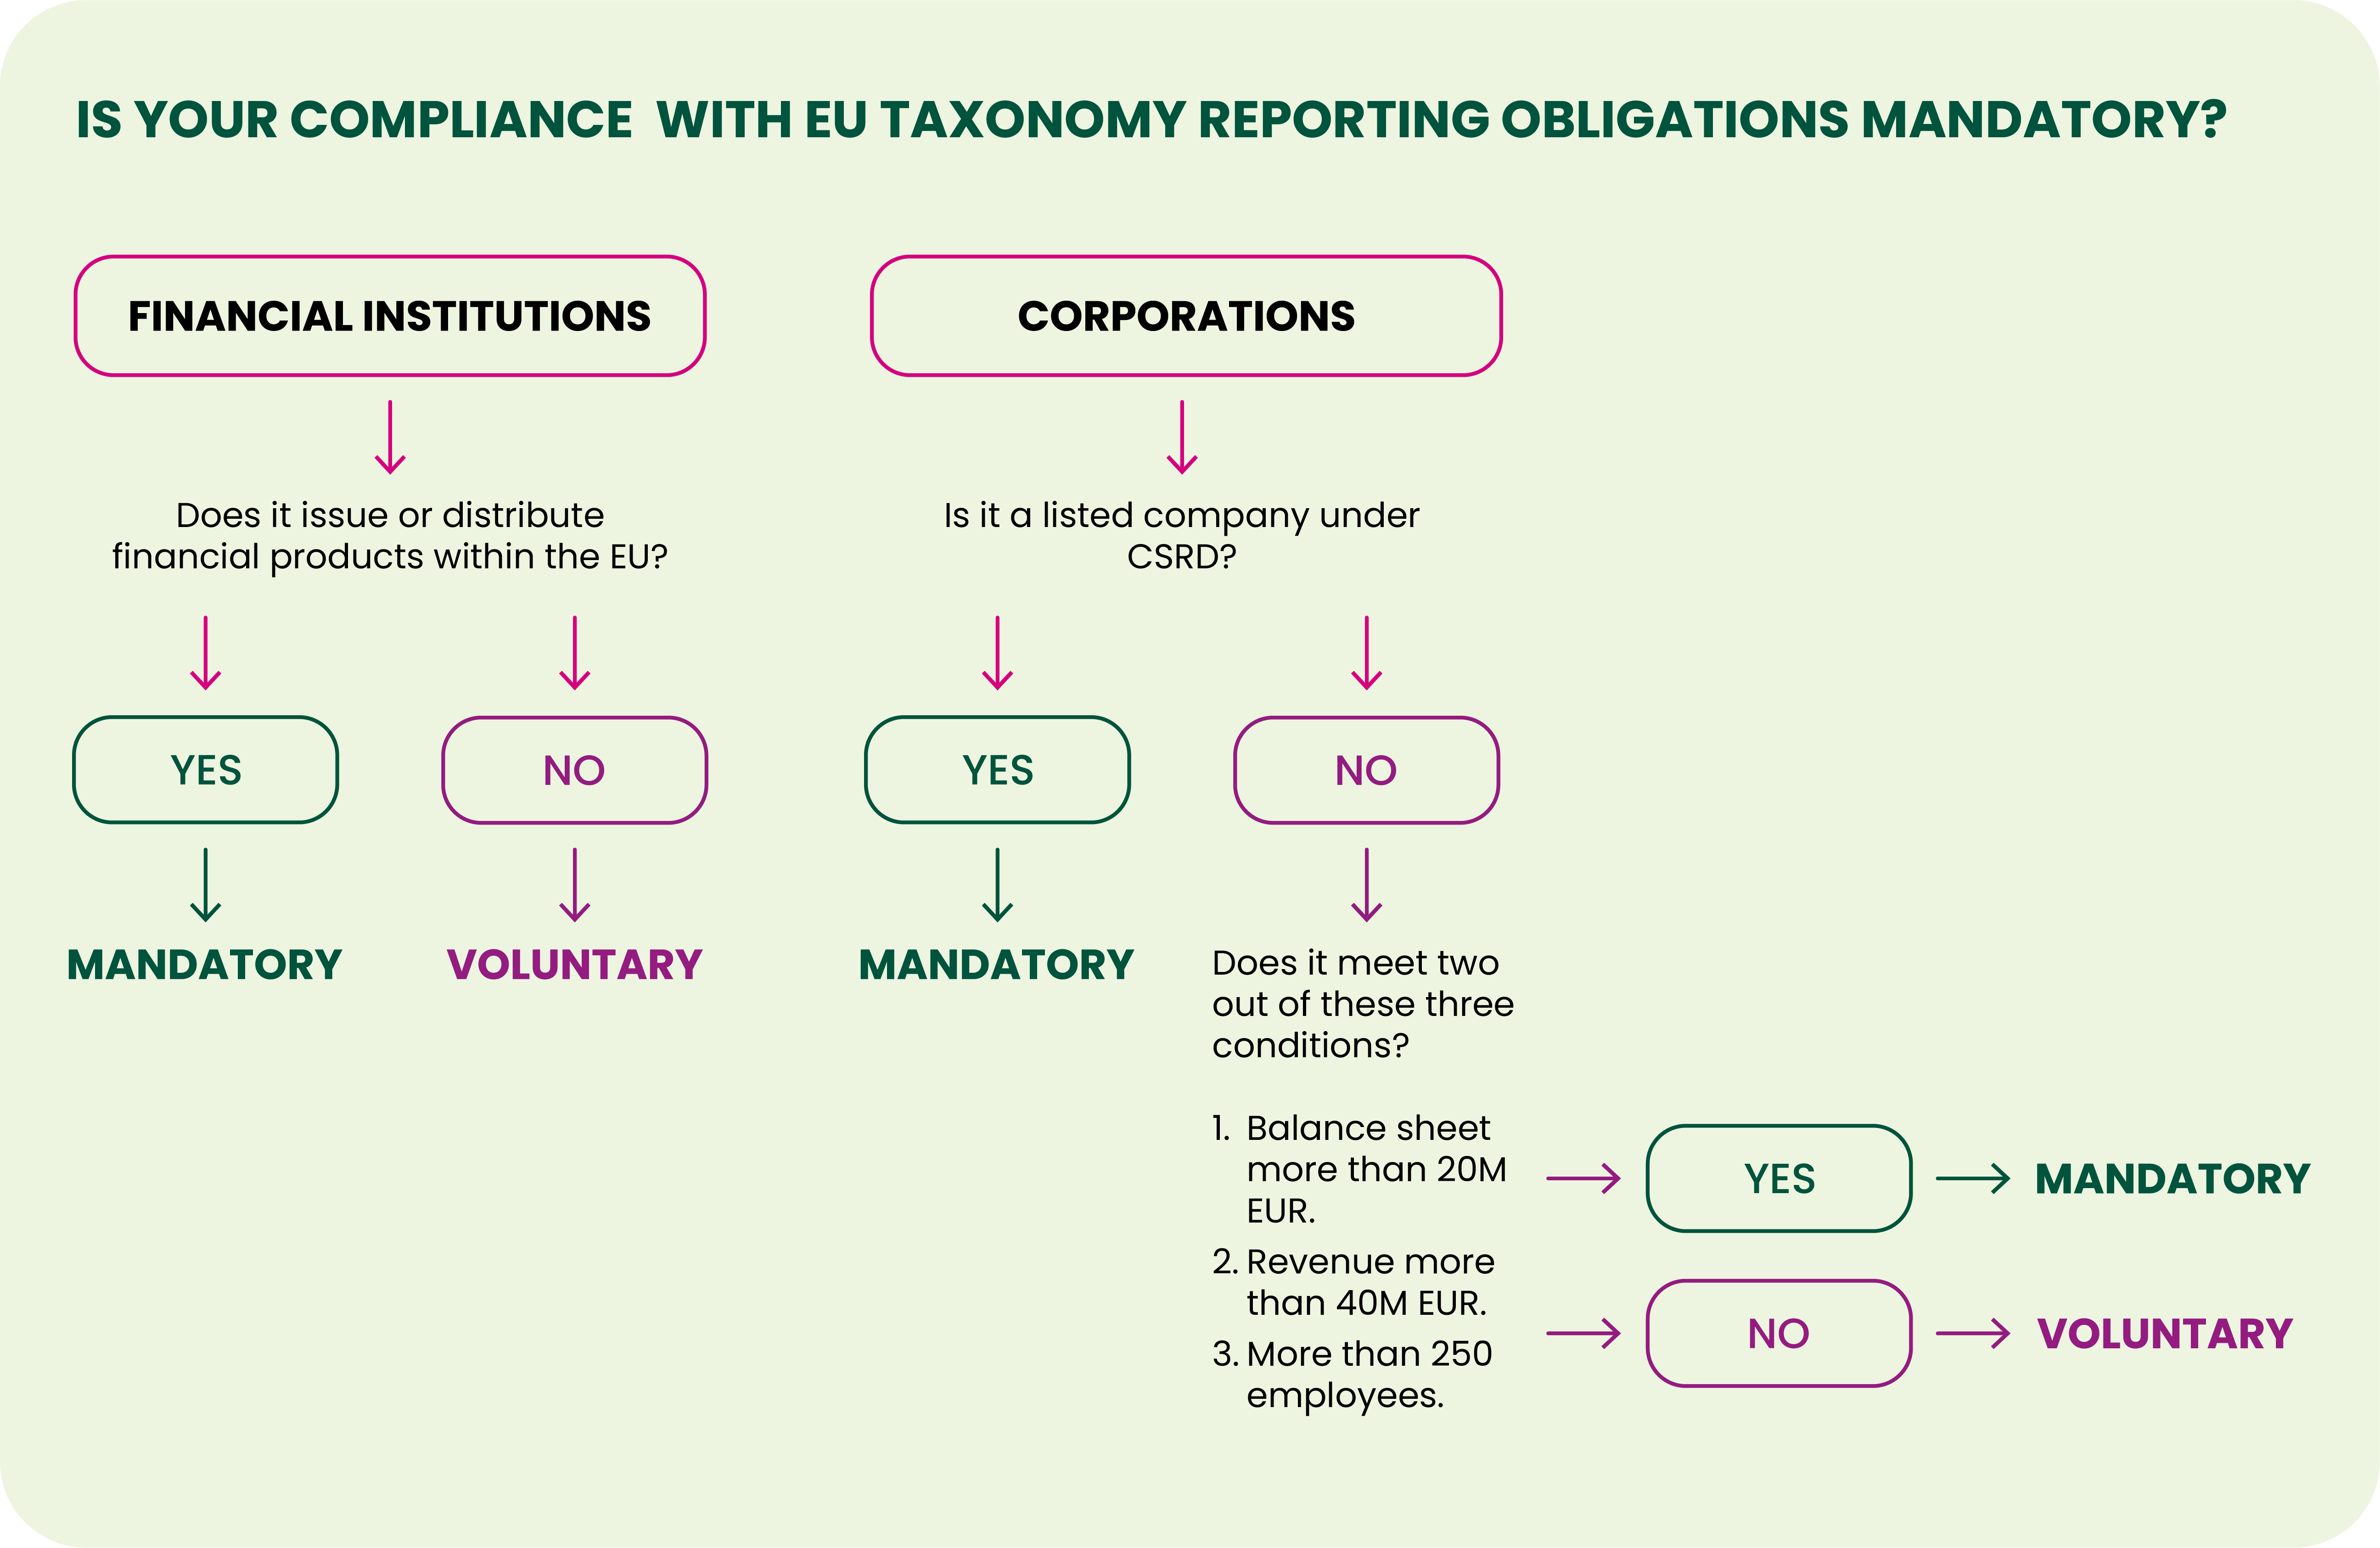 IS YOUR COMPLIANCE WITH EU TAXONOMY REPORTING OBLIGATIONS MANDATORY